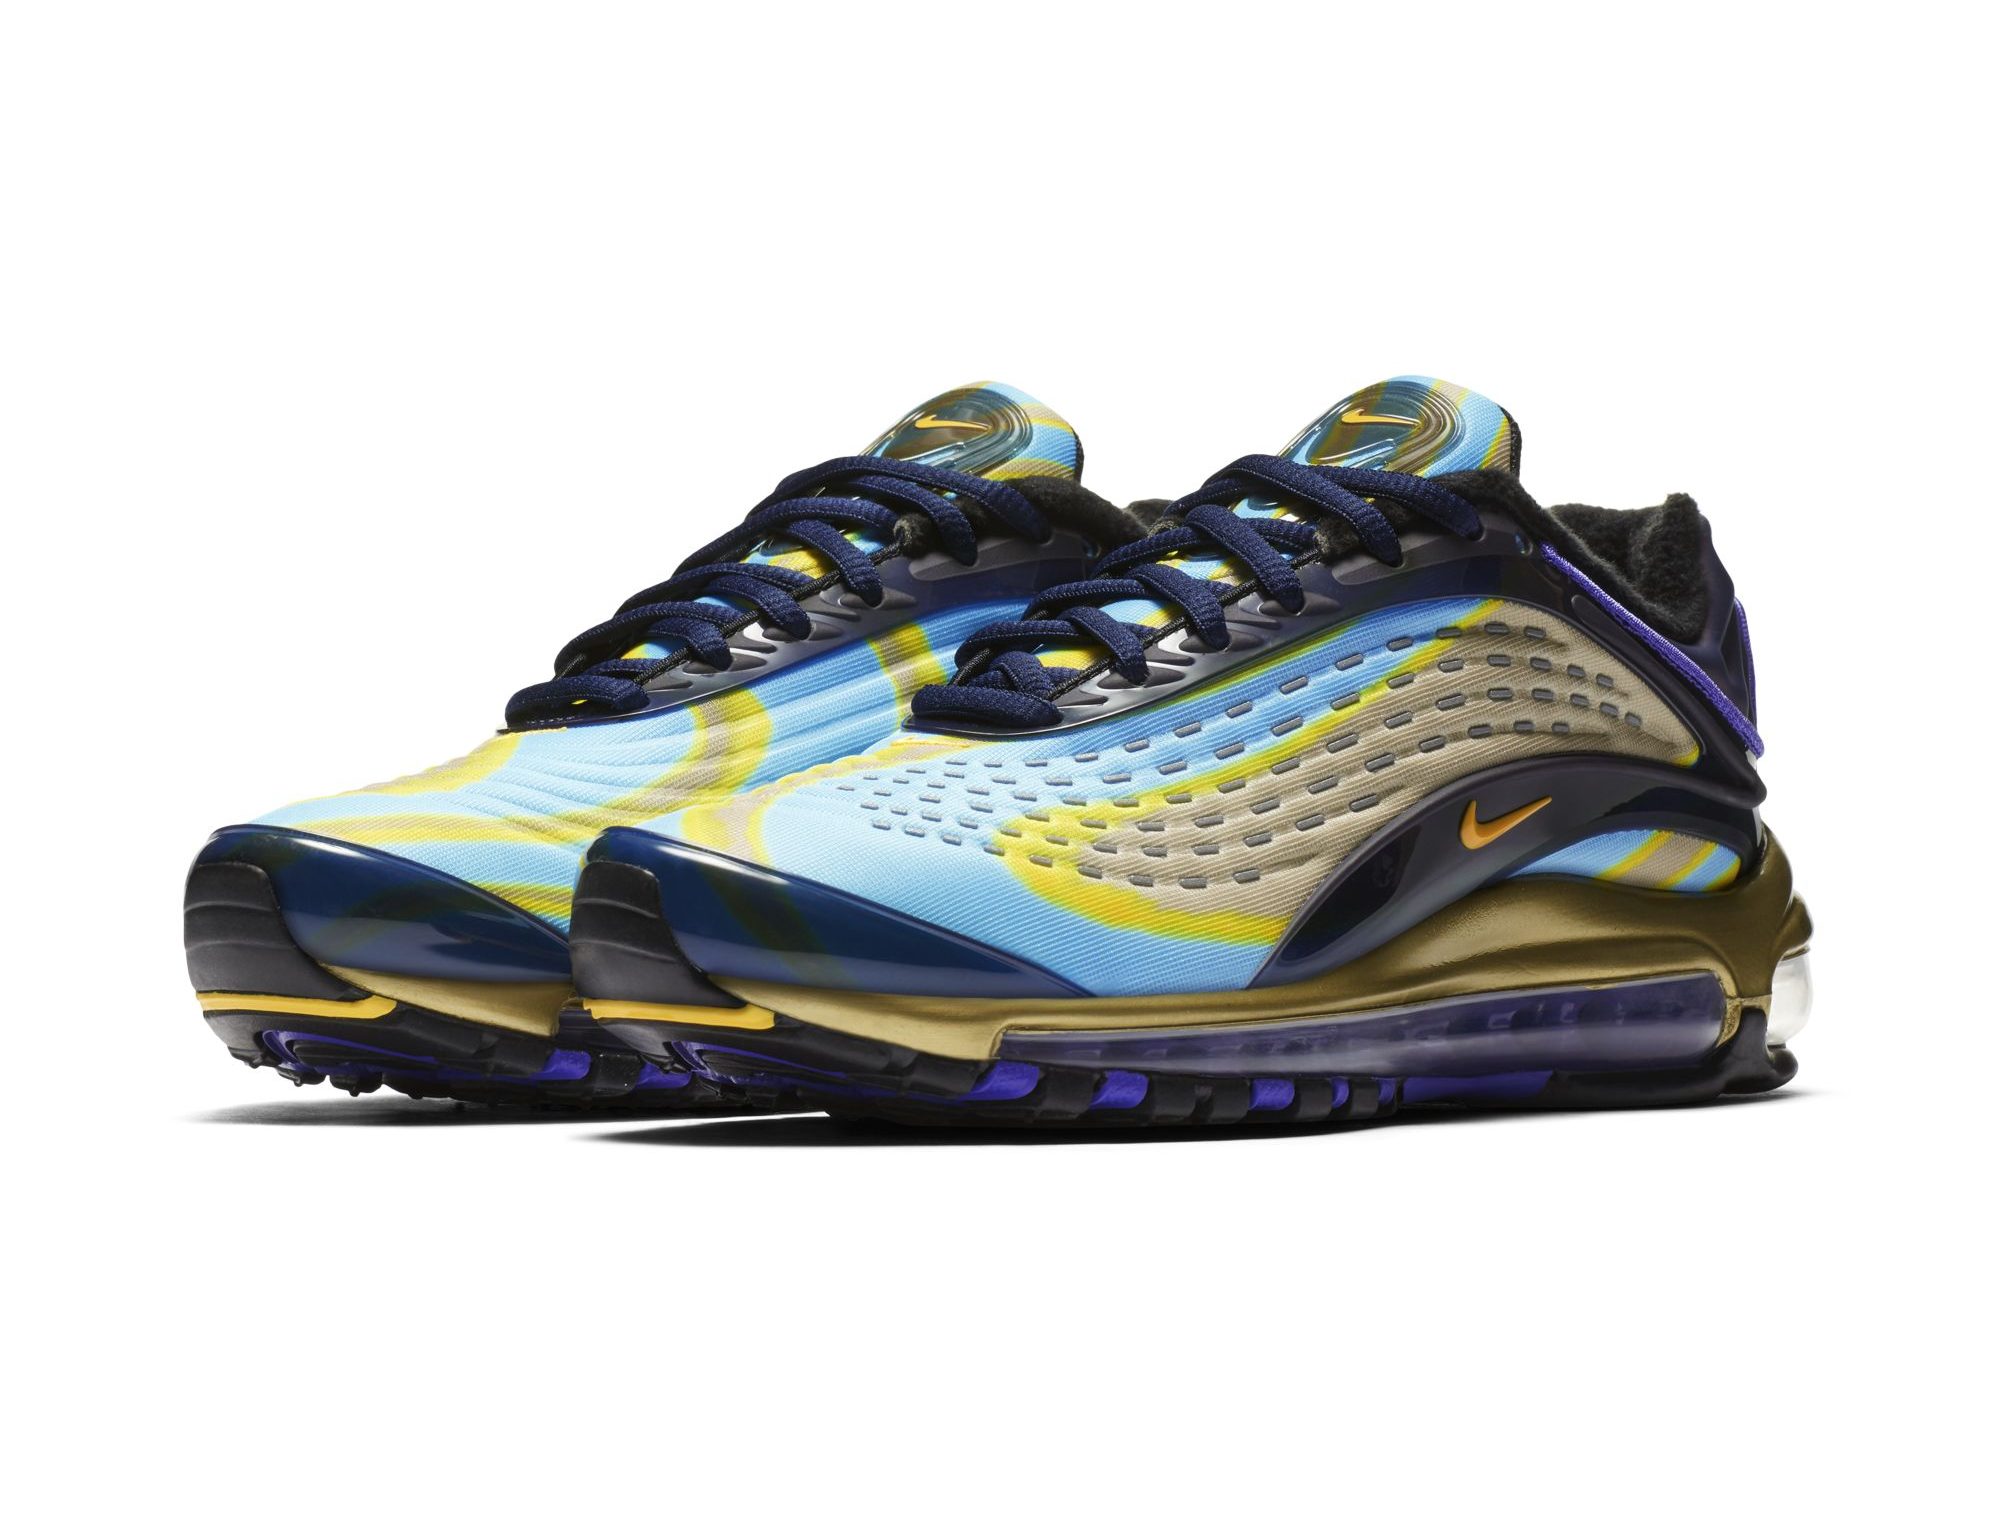 womens nike air max deluxe